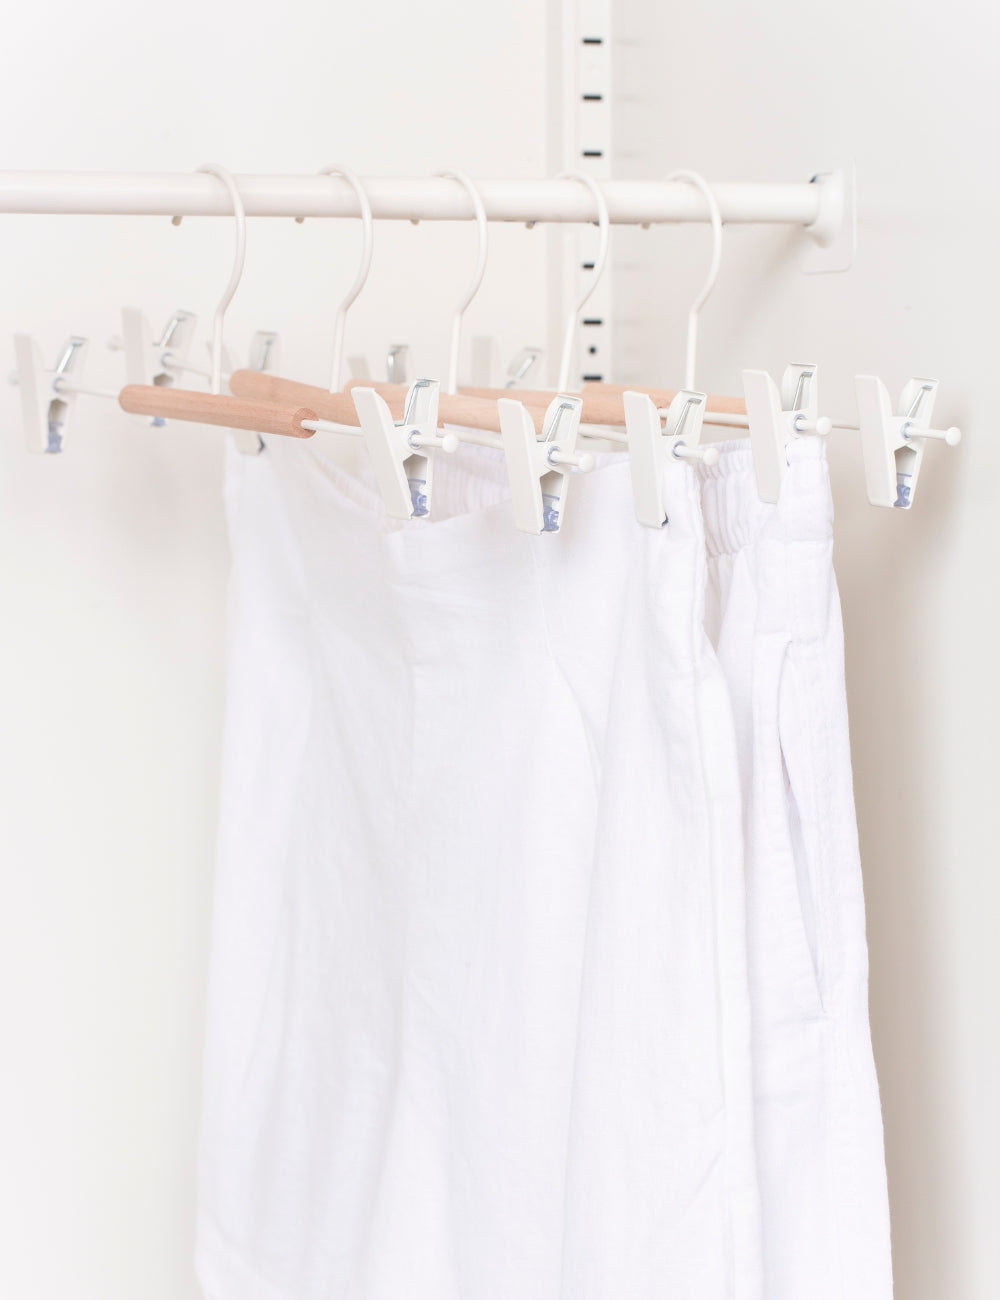 Mustard Made Adult Clip Hangers in White